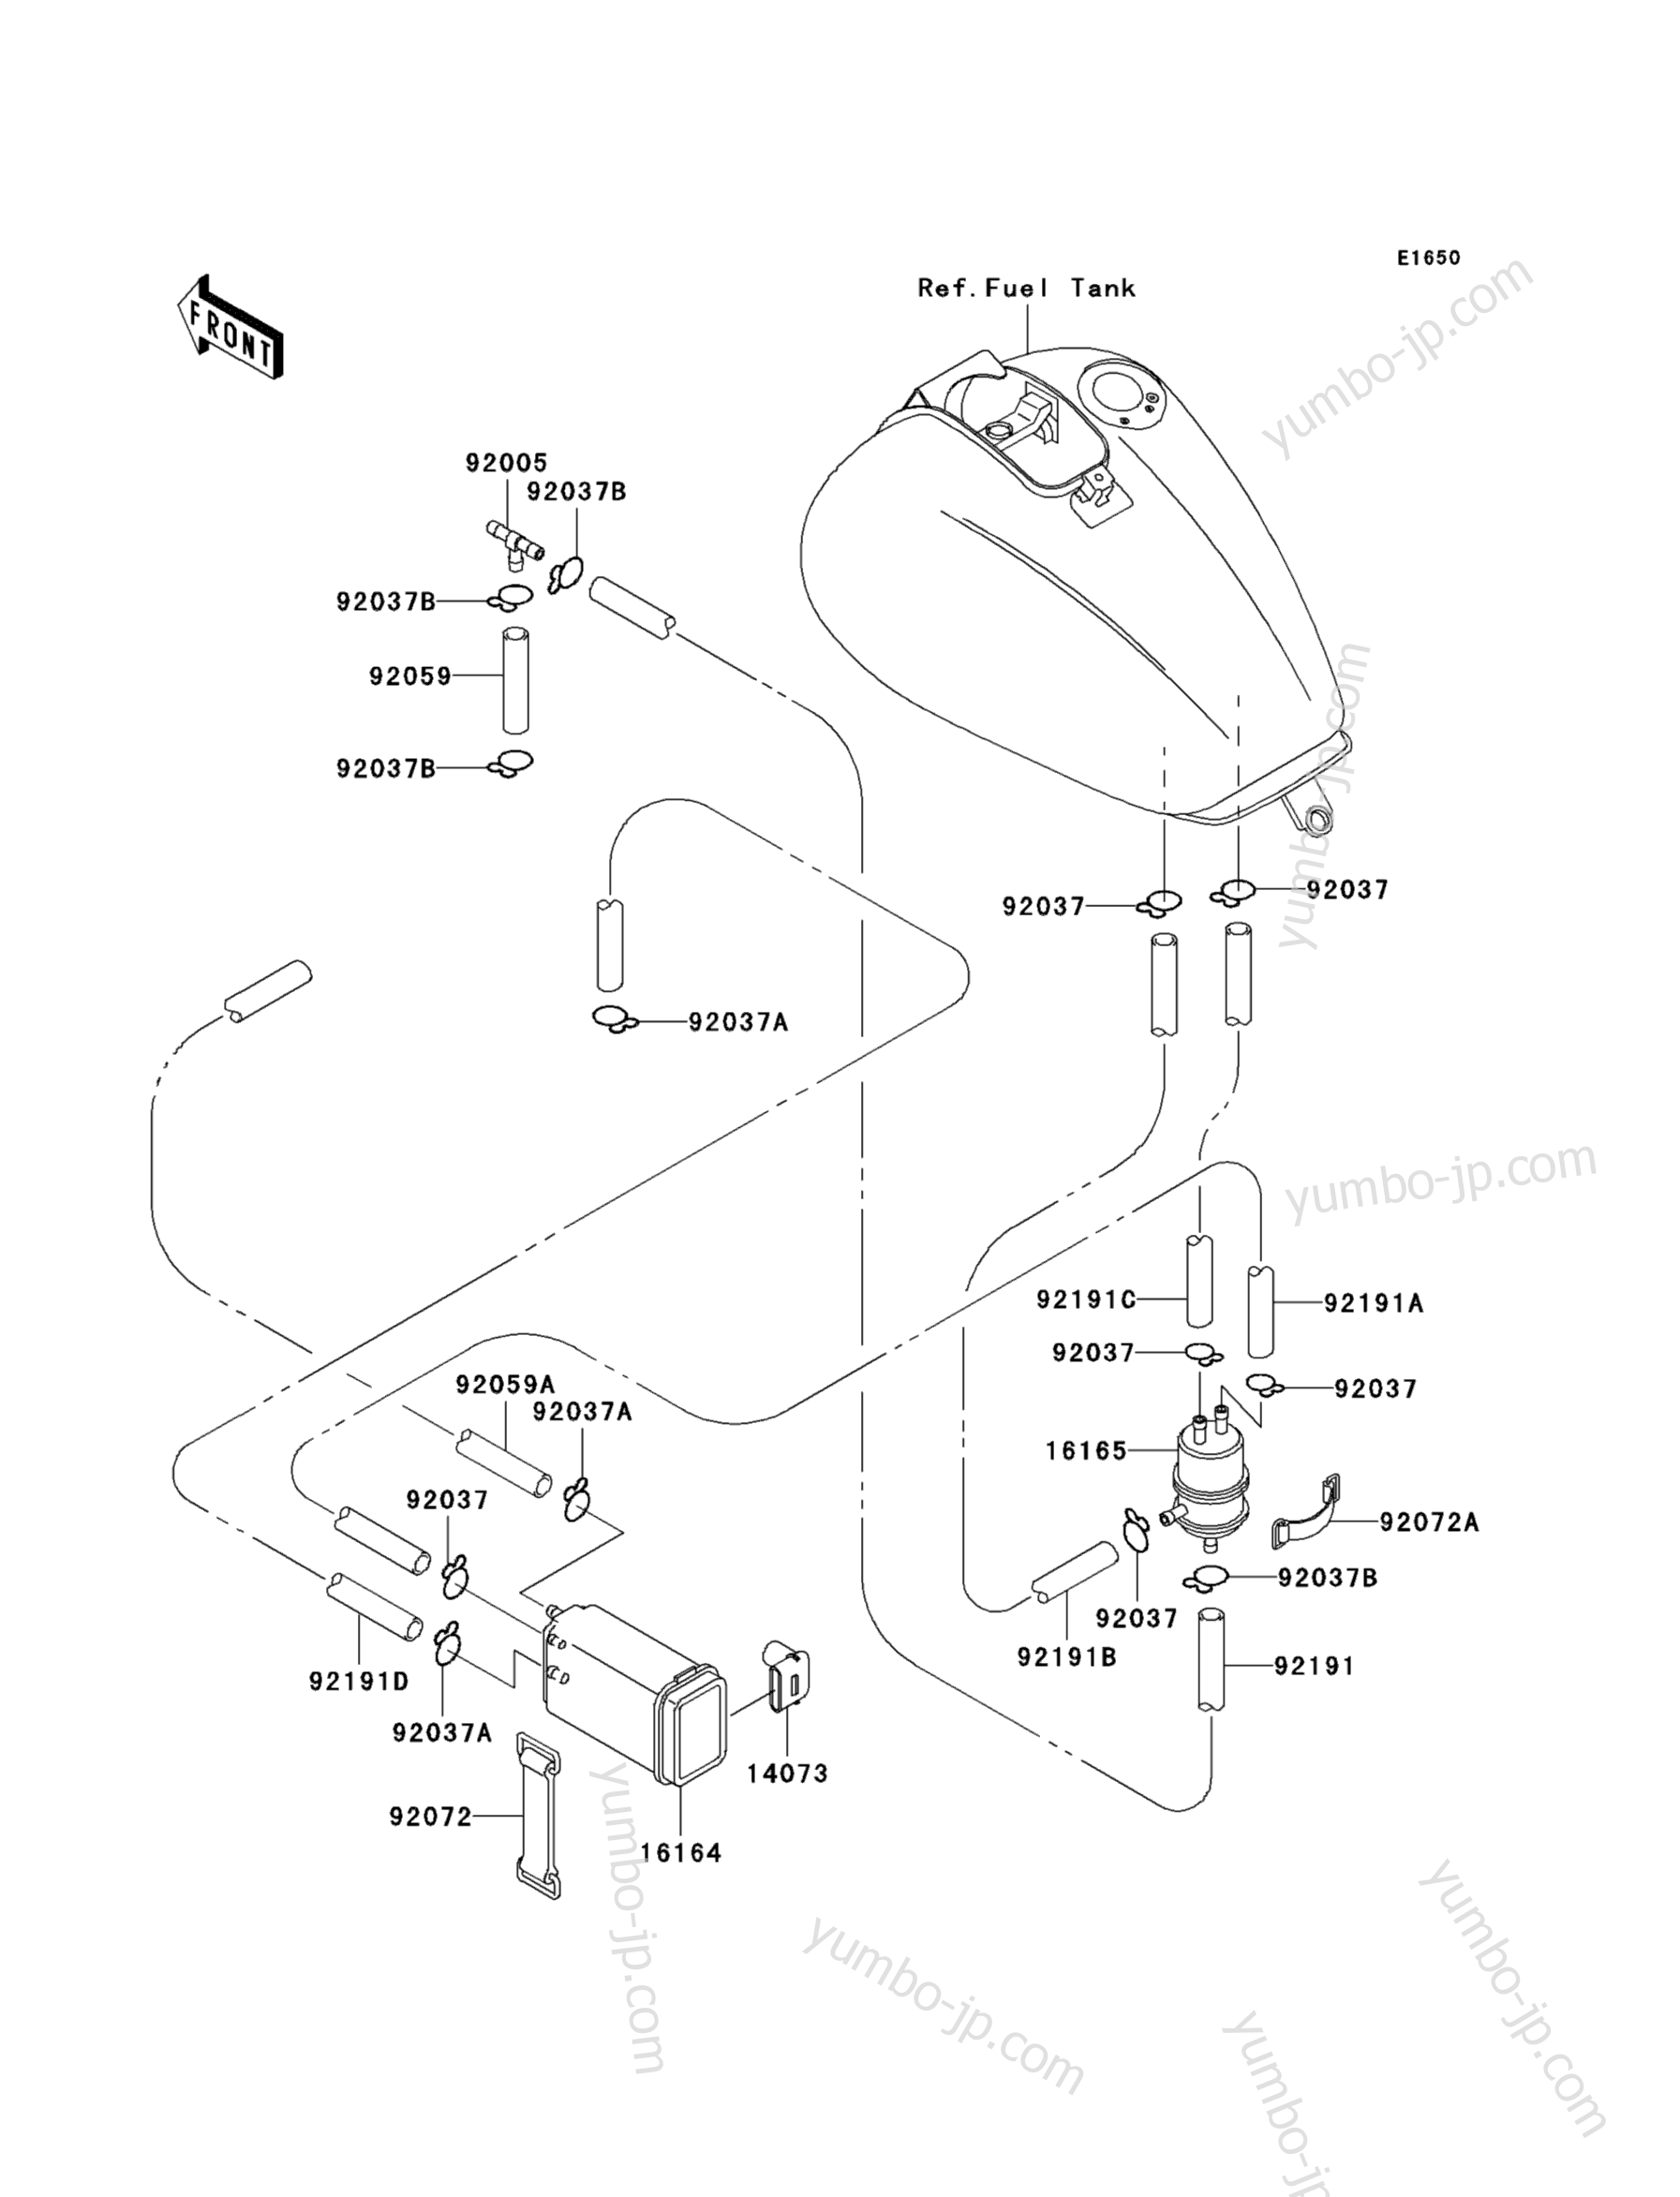 Fuel Evaporative System(CA) for motorcycles KAWASAKI VULCAN 1500 CLASSIC (VN1500-E3) 2000 year